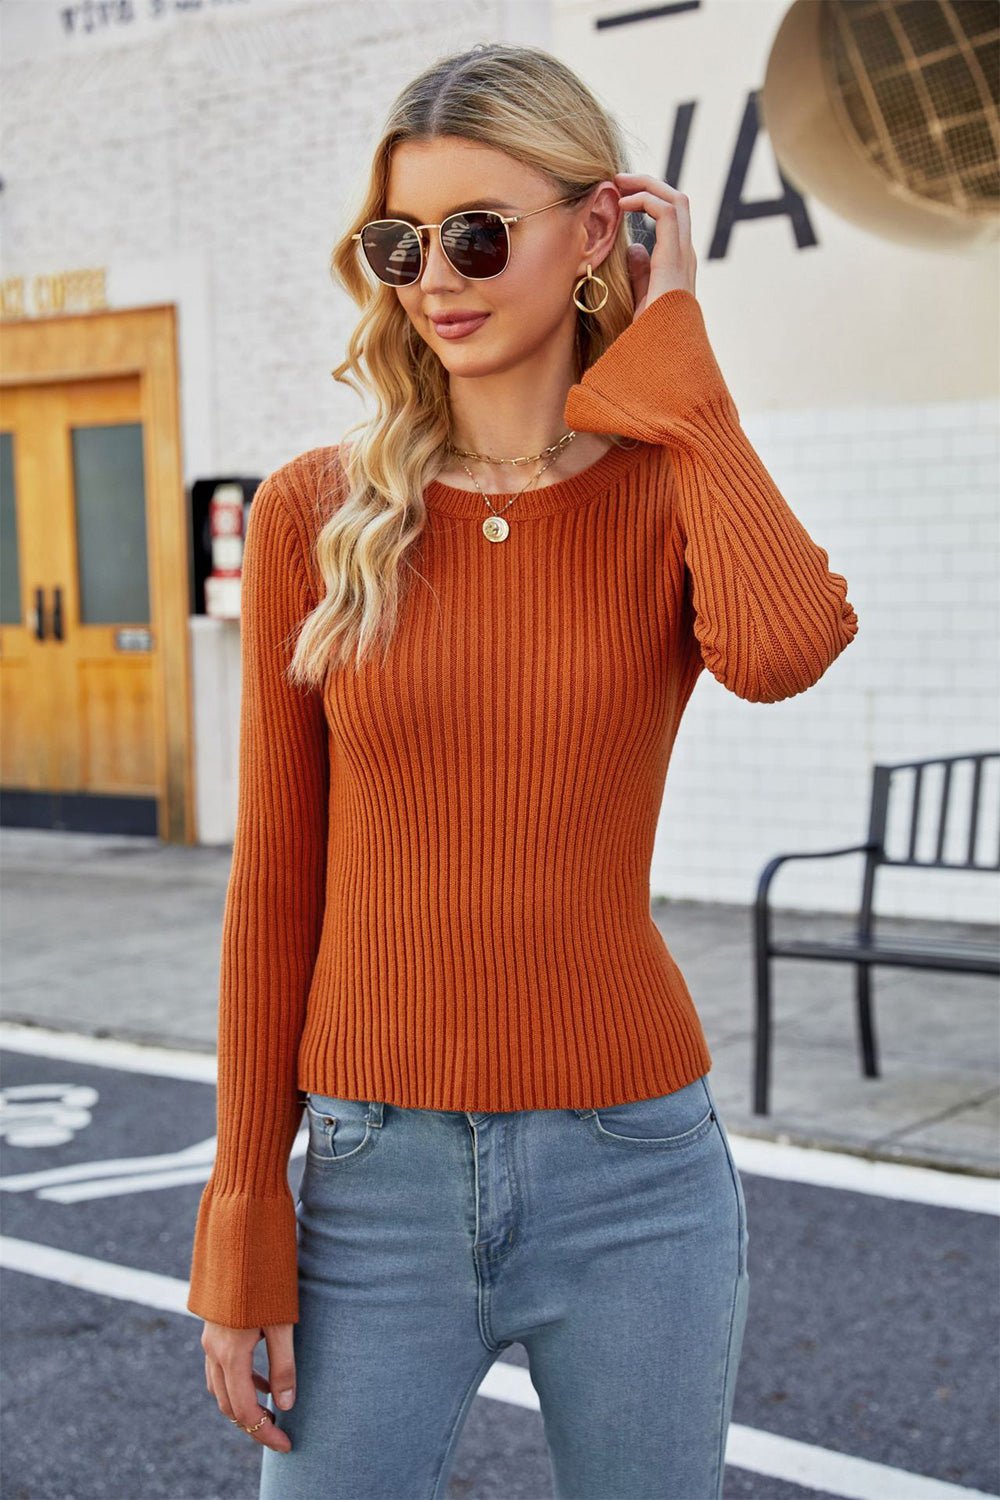 Flounce Sleeve Round Neck Rib-Knit Top - Fashion Girl Online Store